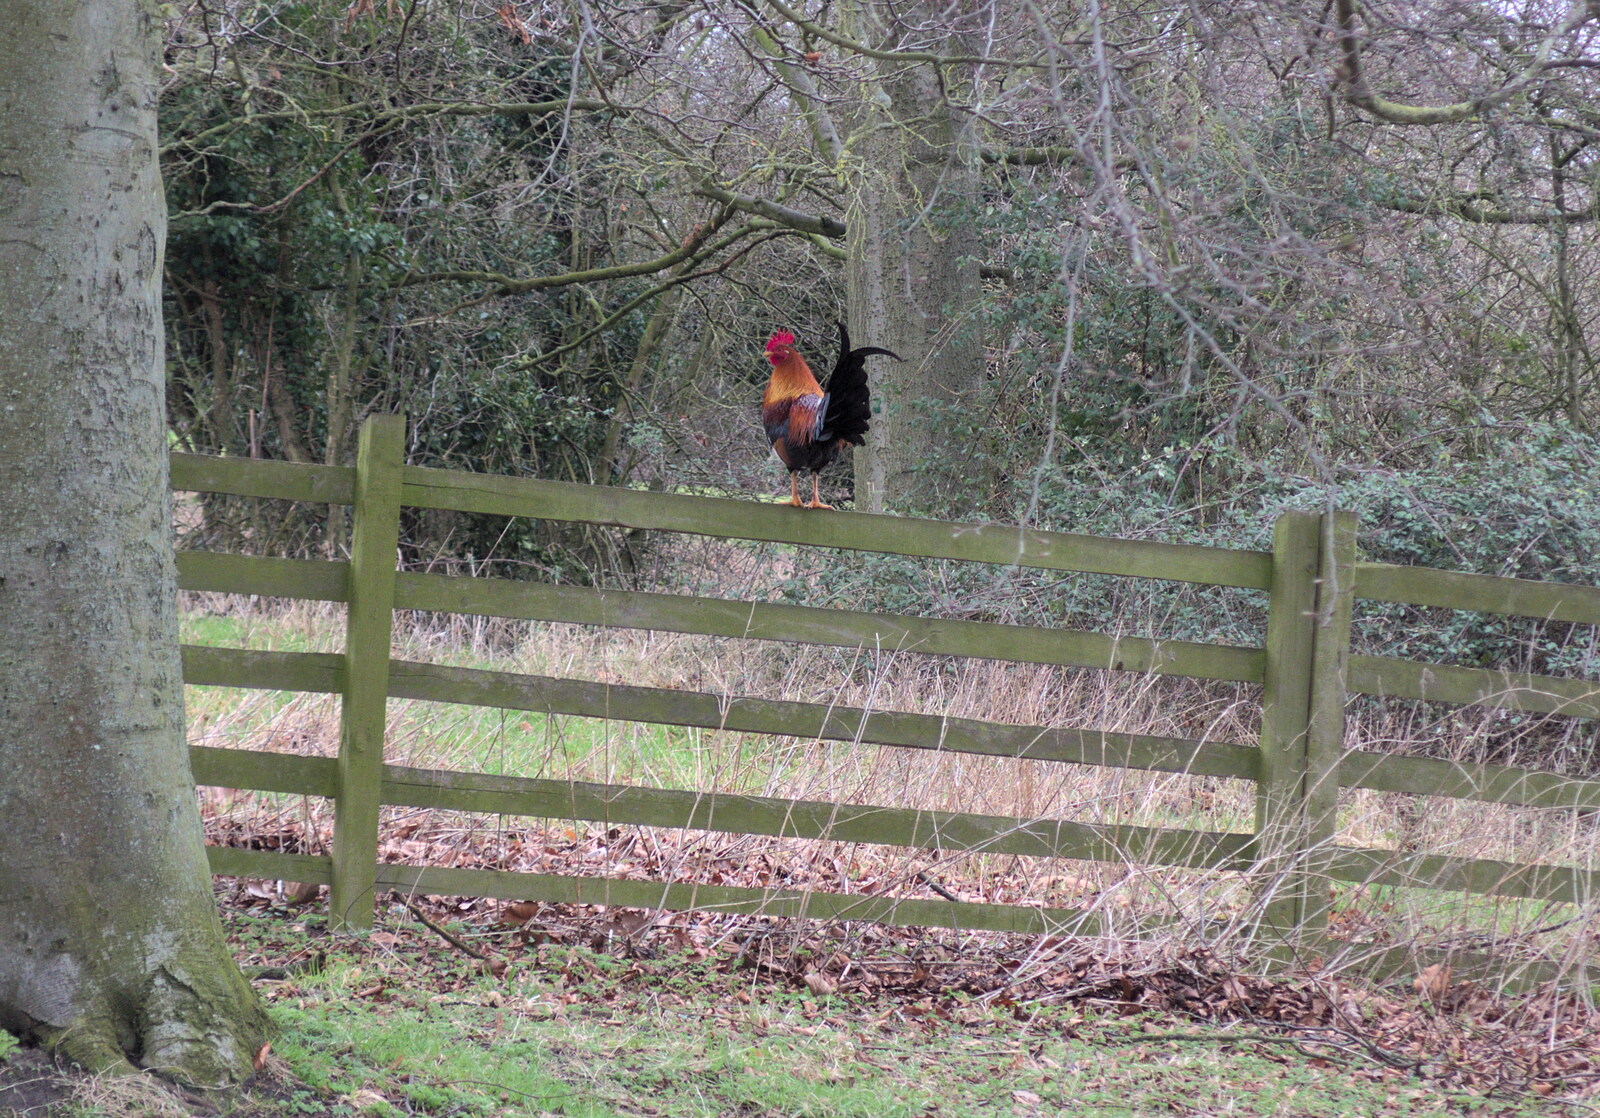 There's a cockerel perched on a fence from Paddington Fire Alarms and Mere Moments Café, Diss, Norfolk - 2nd February 2018